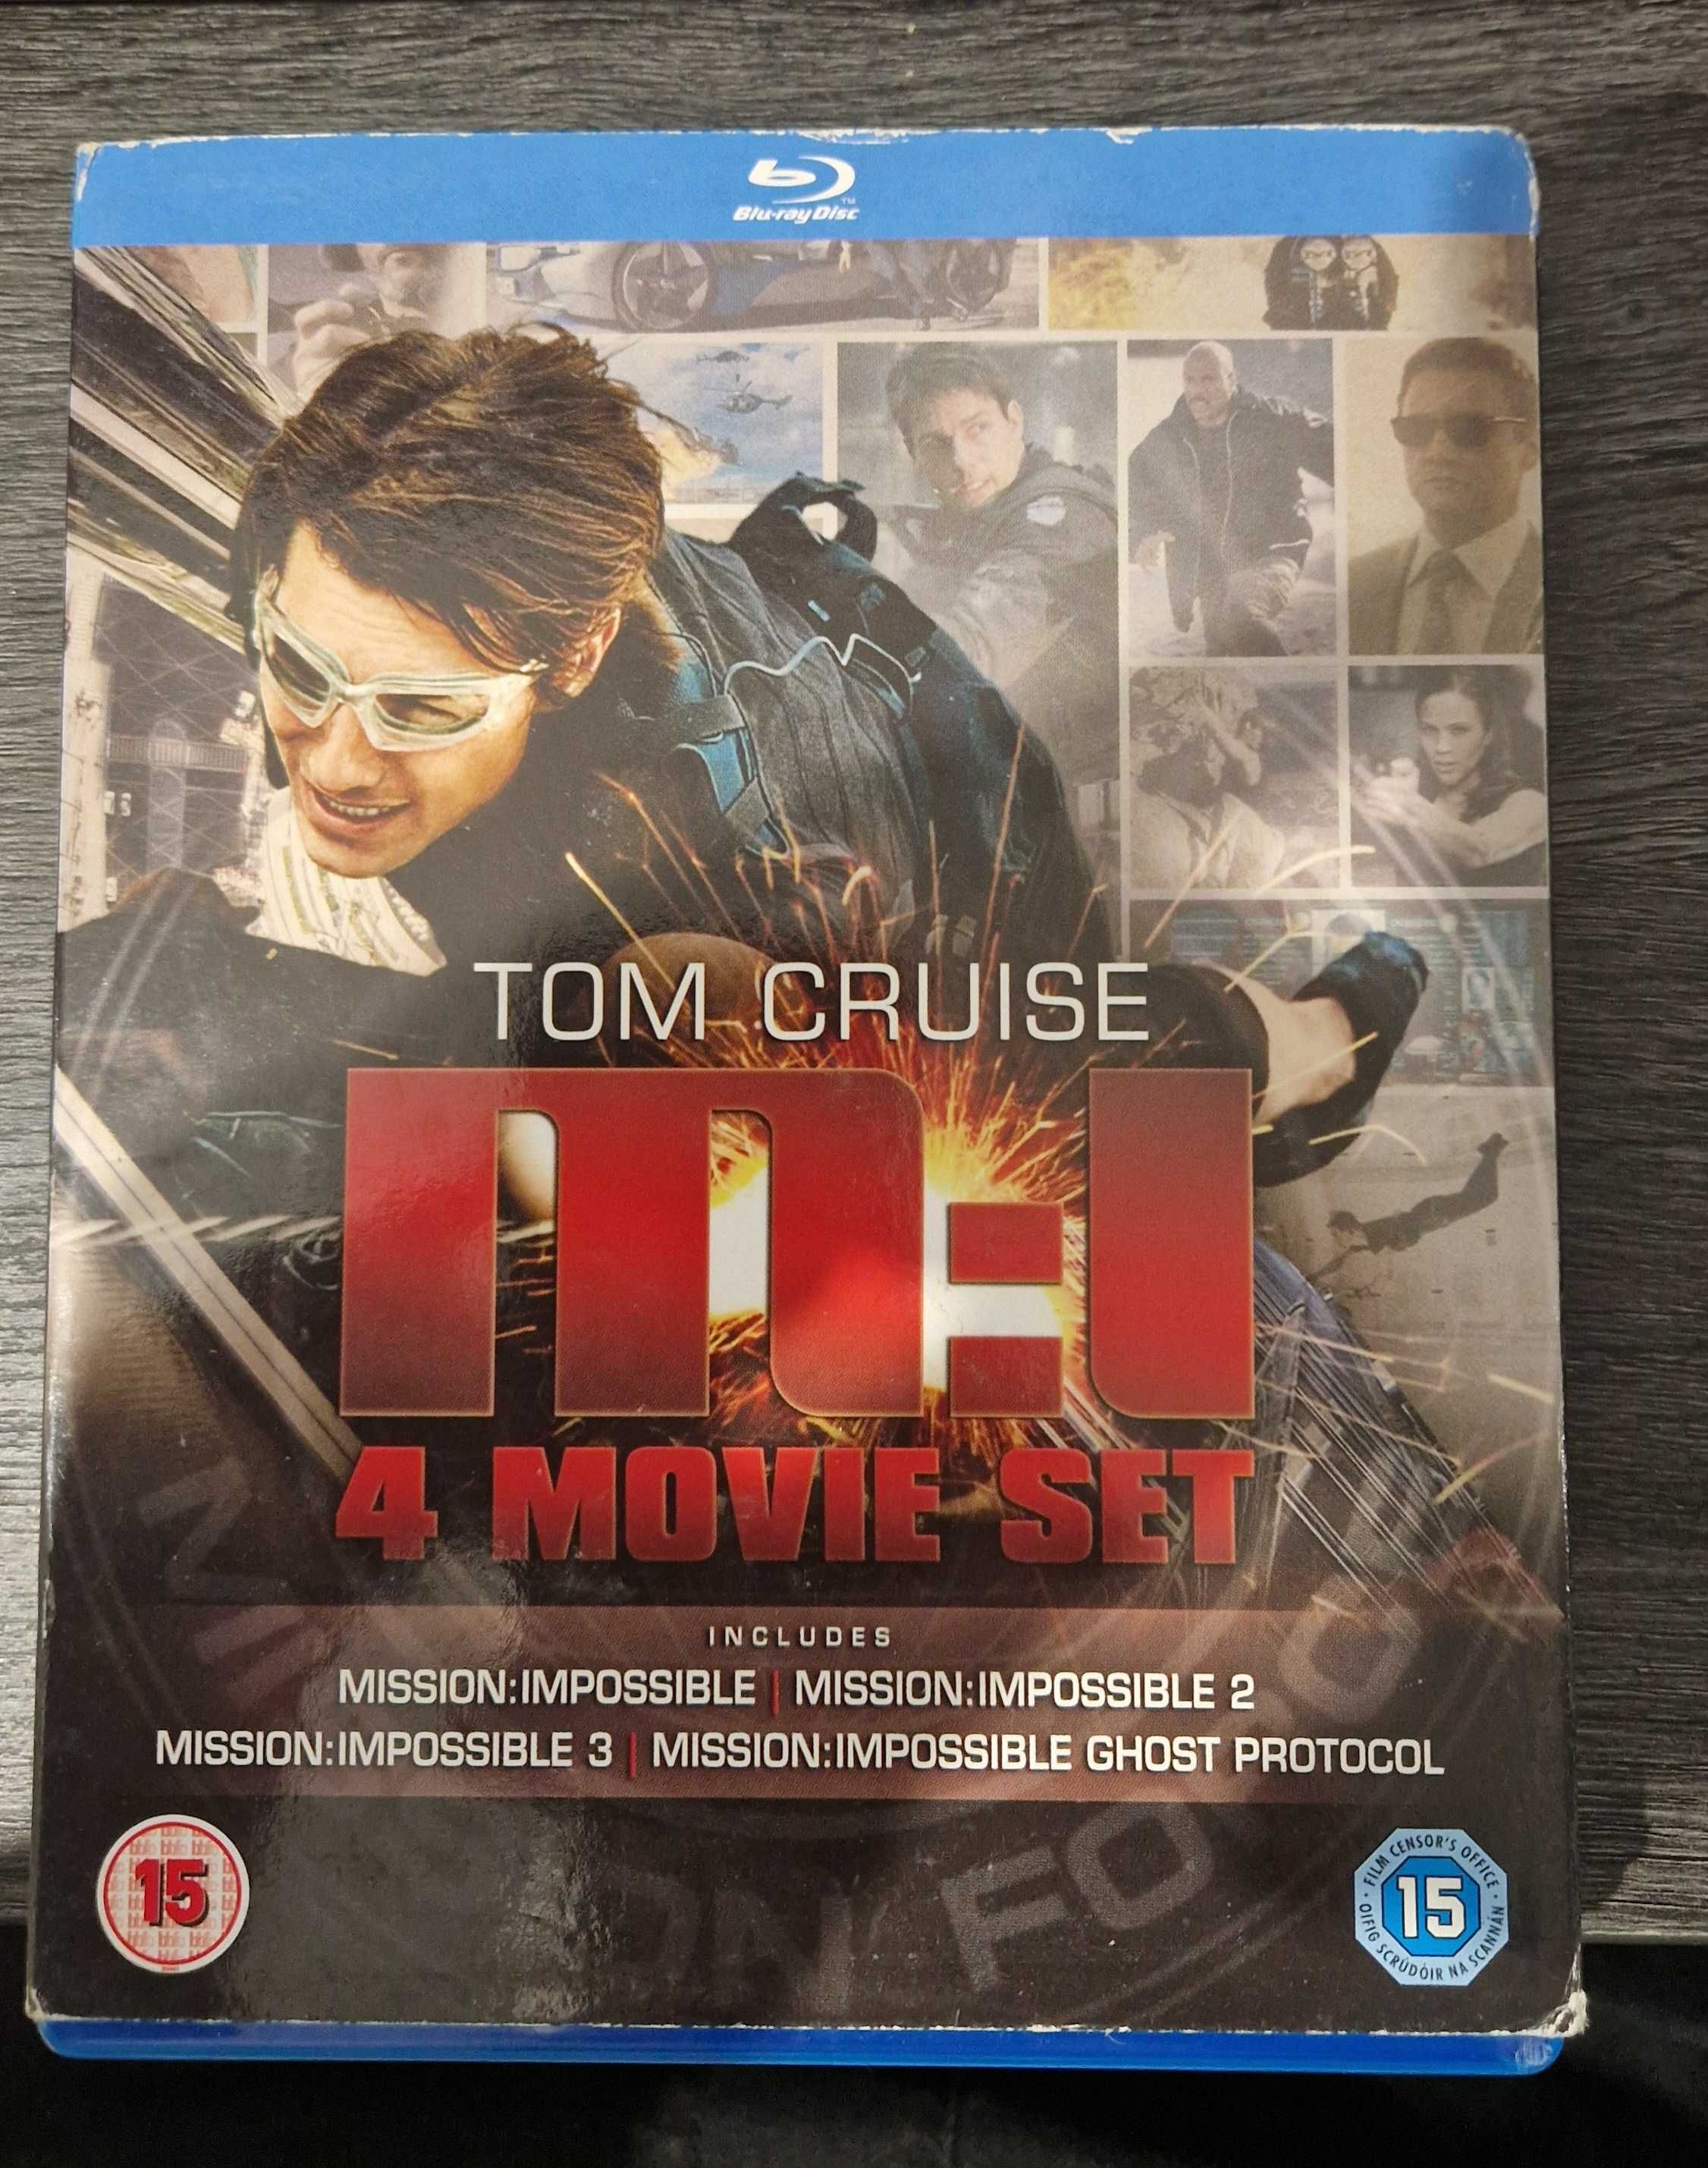 Mission Impossible Blu-Ray - 4 Movie Set